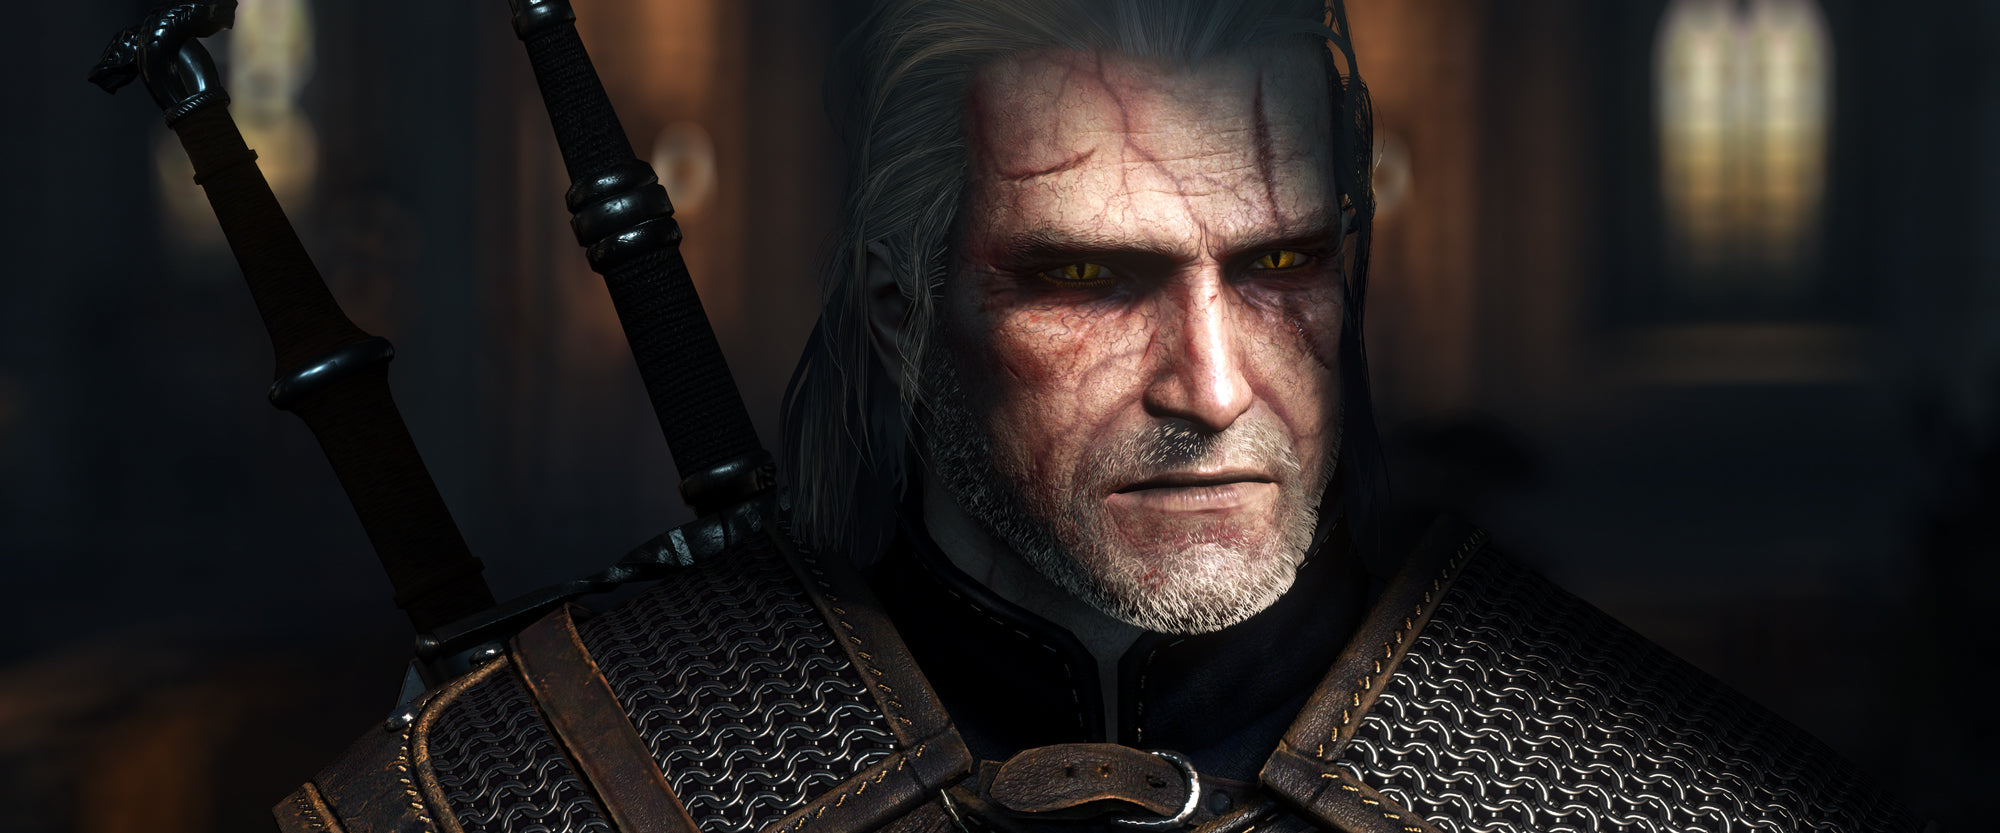 The Witcher 3: Wild Hunt shot by Jim2point0